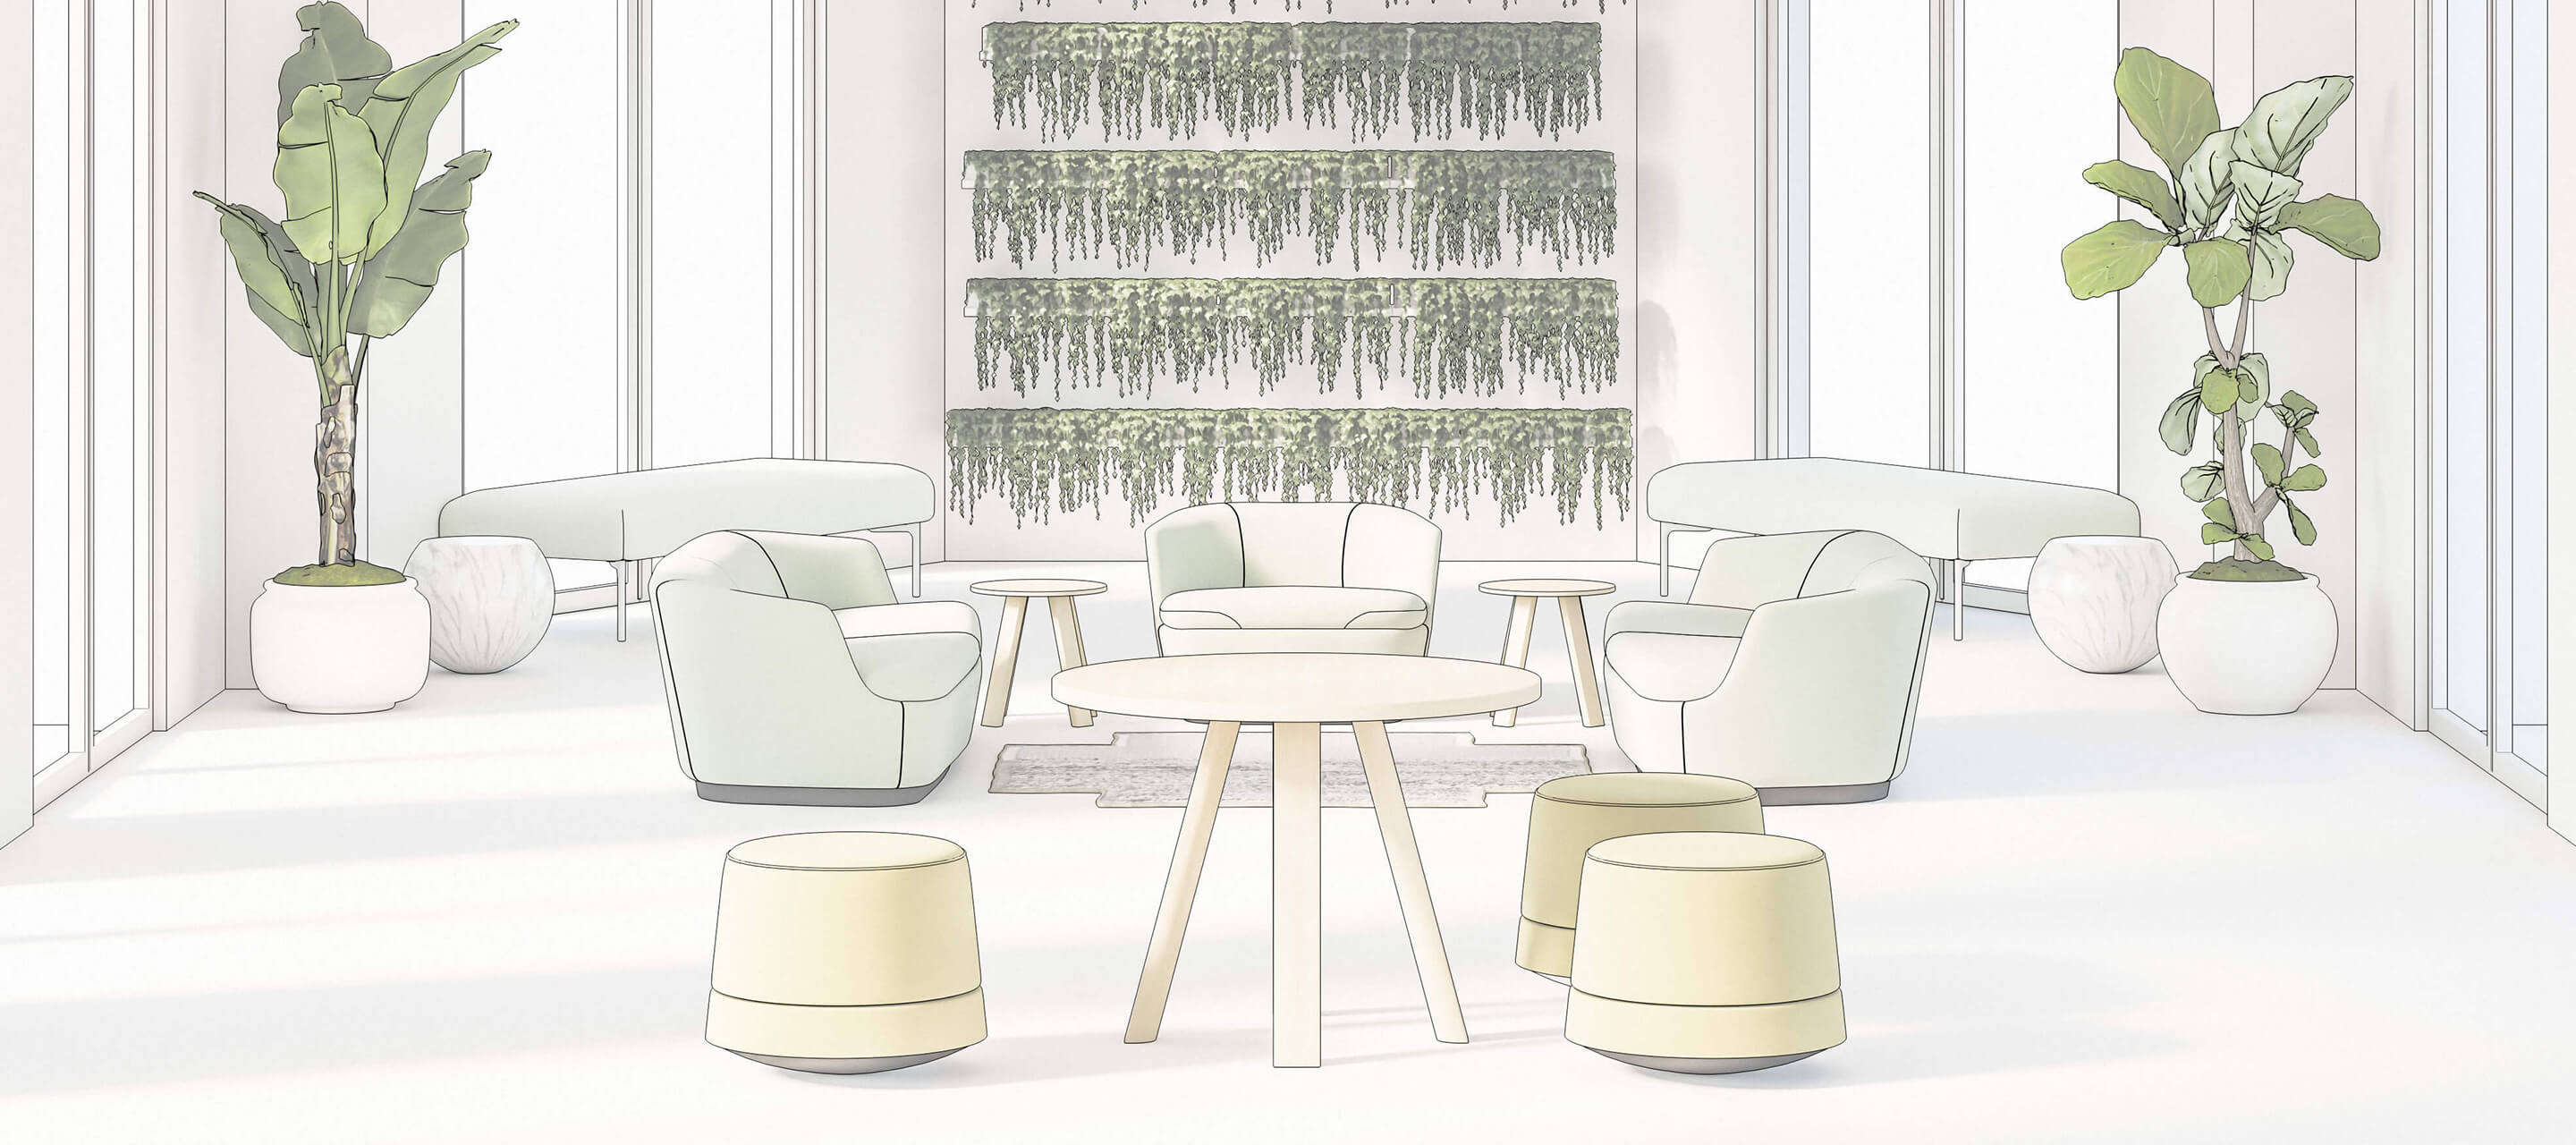 Haworth Lounge mock up with multiple tables and chairs and fern wall with fern plants in open office space